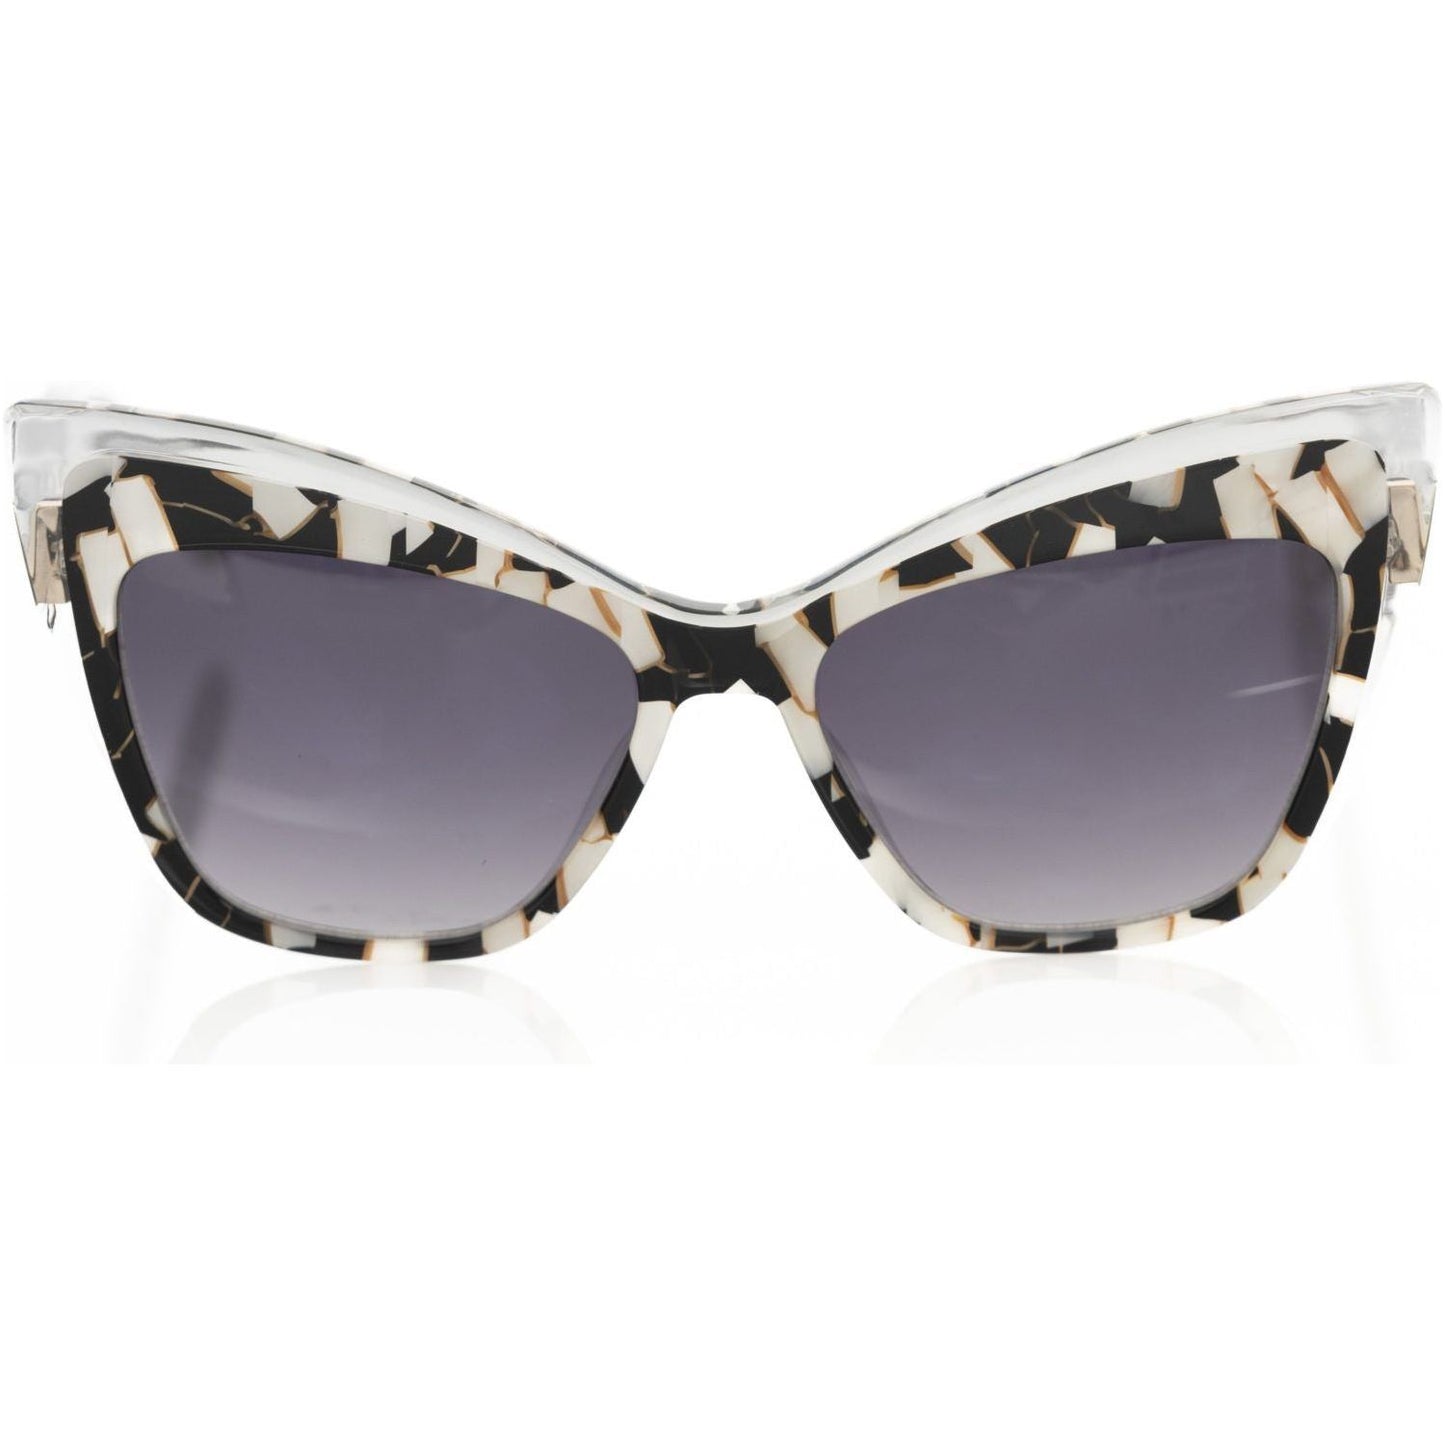 Frankie MorelloChic Cat Eye Sunglasses with Pearly AccentMcRichard Designer Brands£79.00